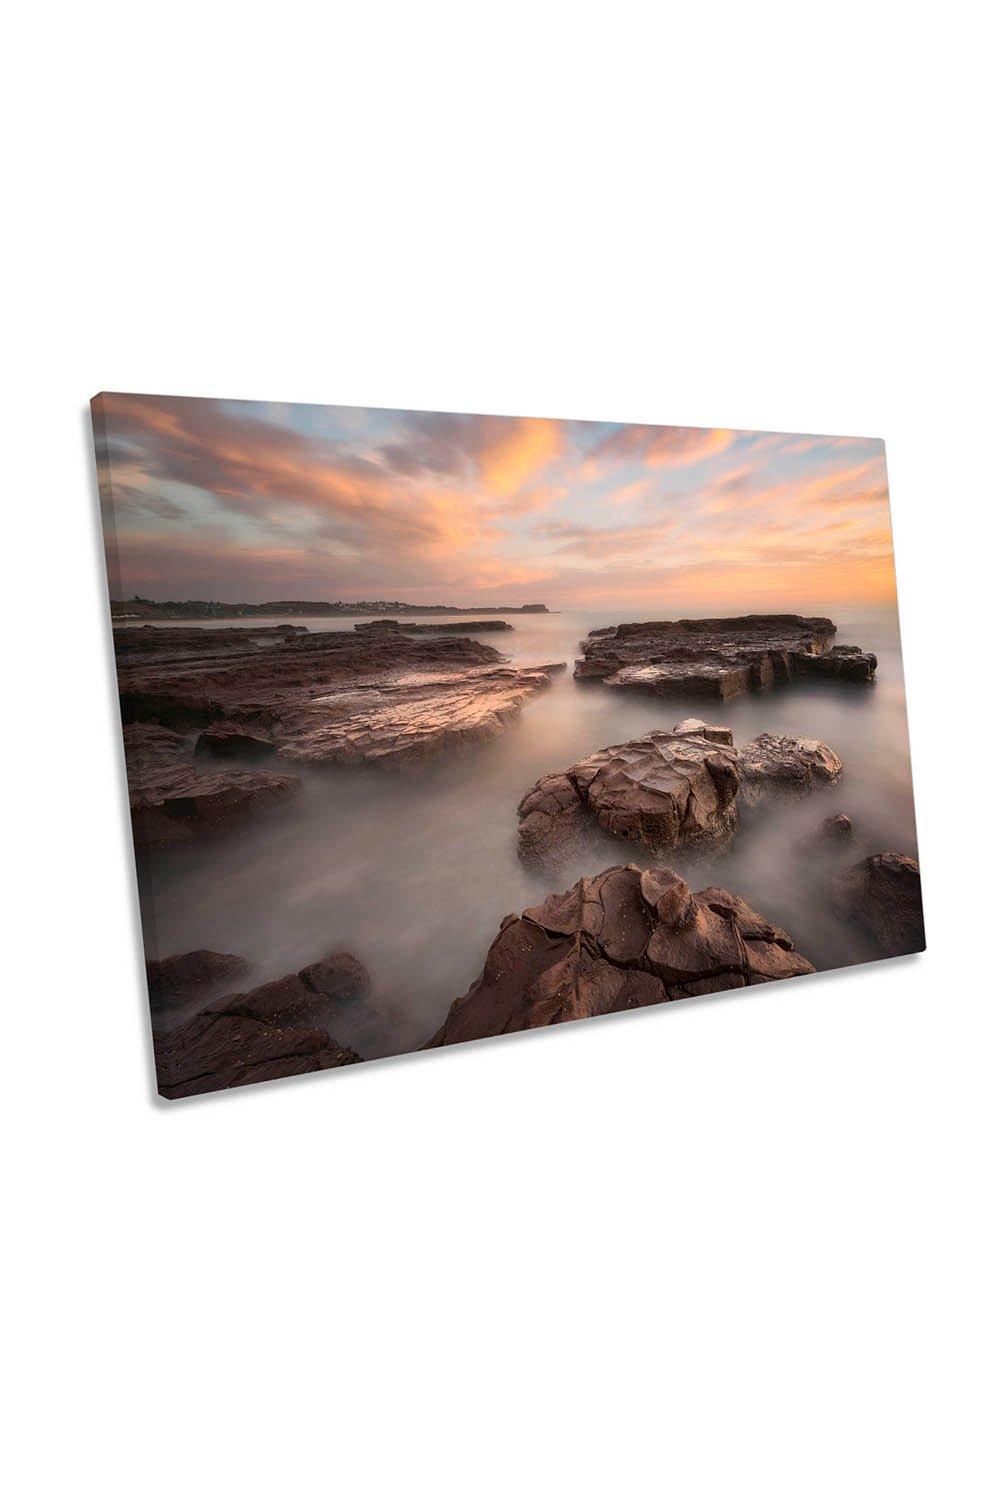 Summer Sunset Glow Seascape Canvas Wall Art Picture Print